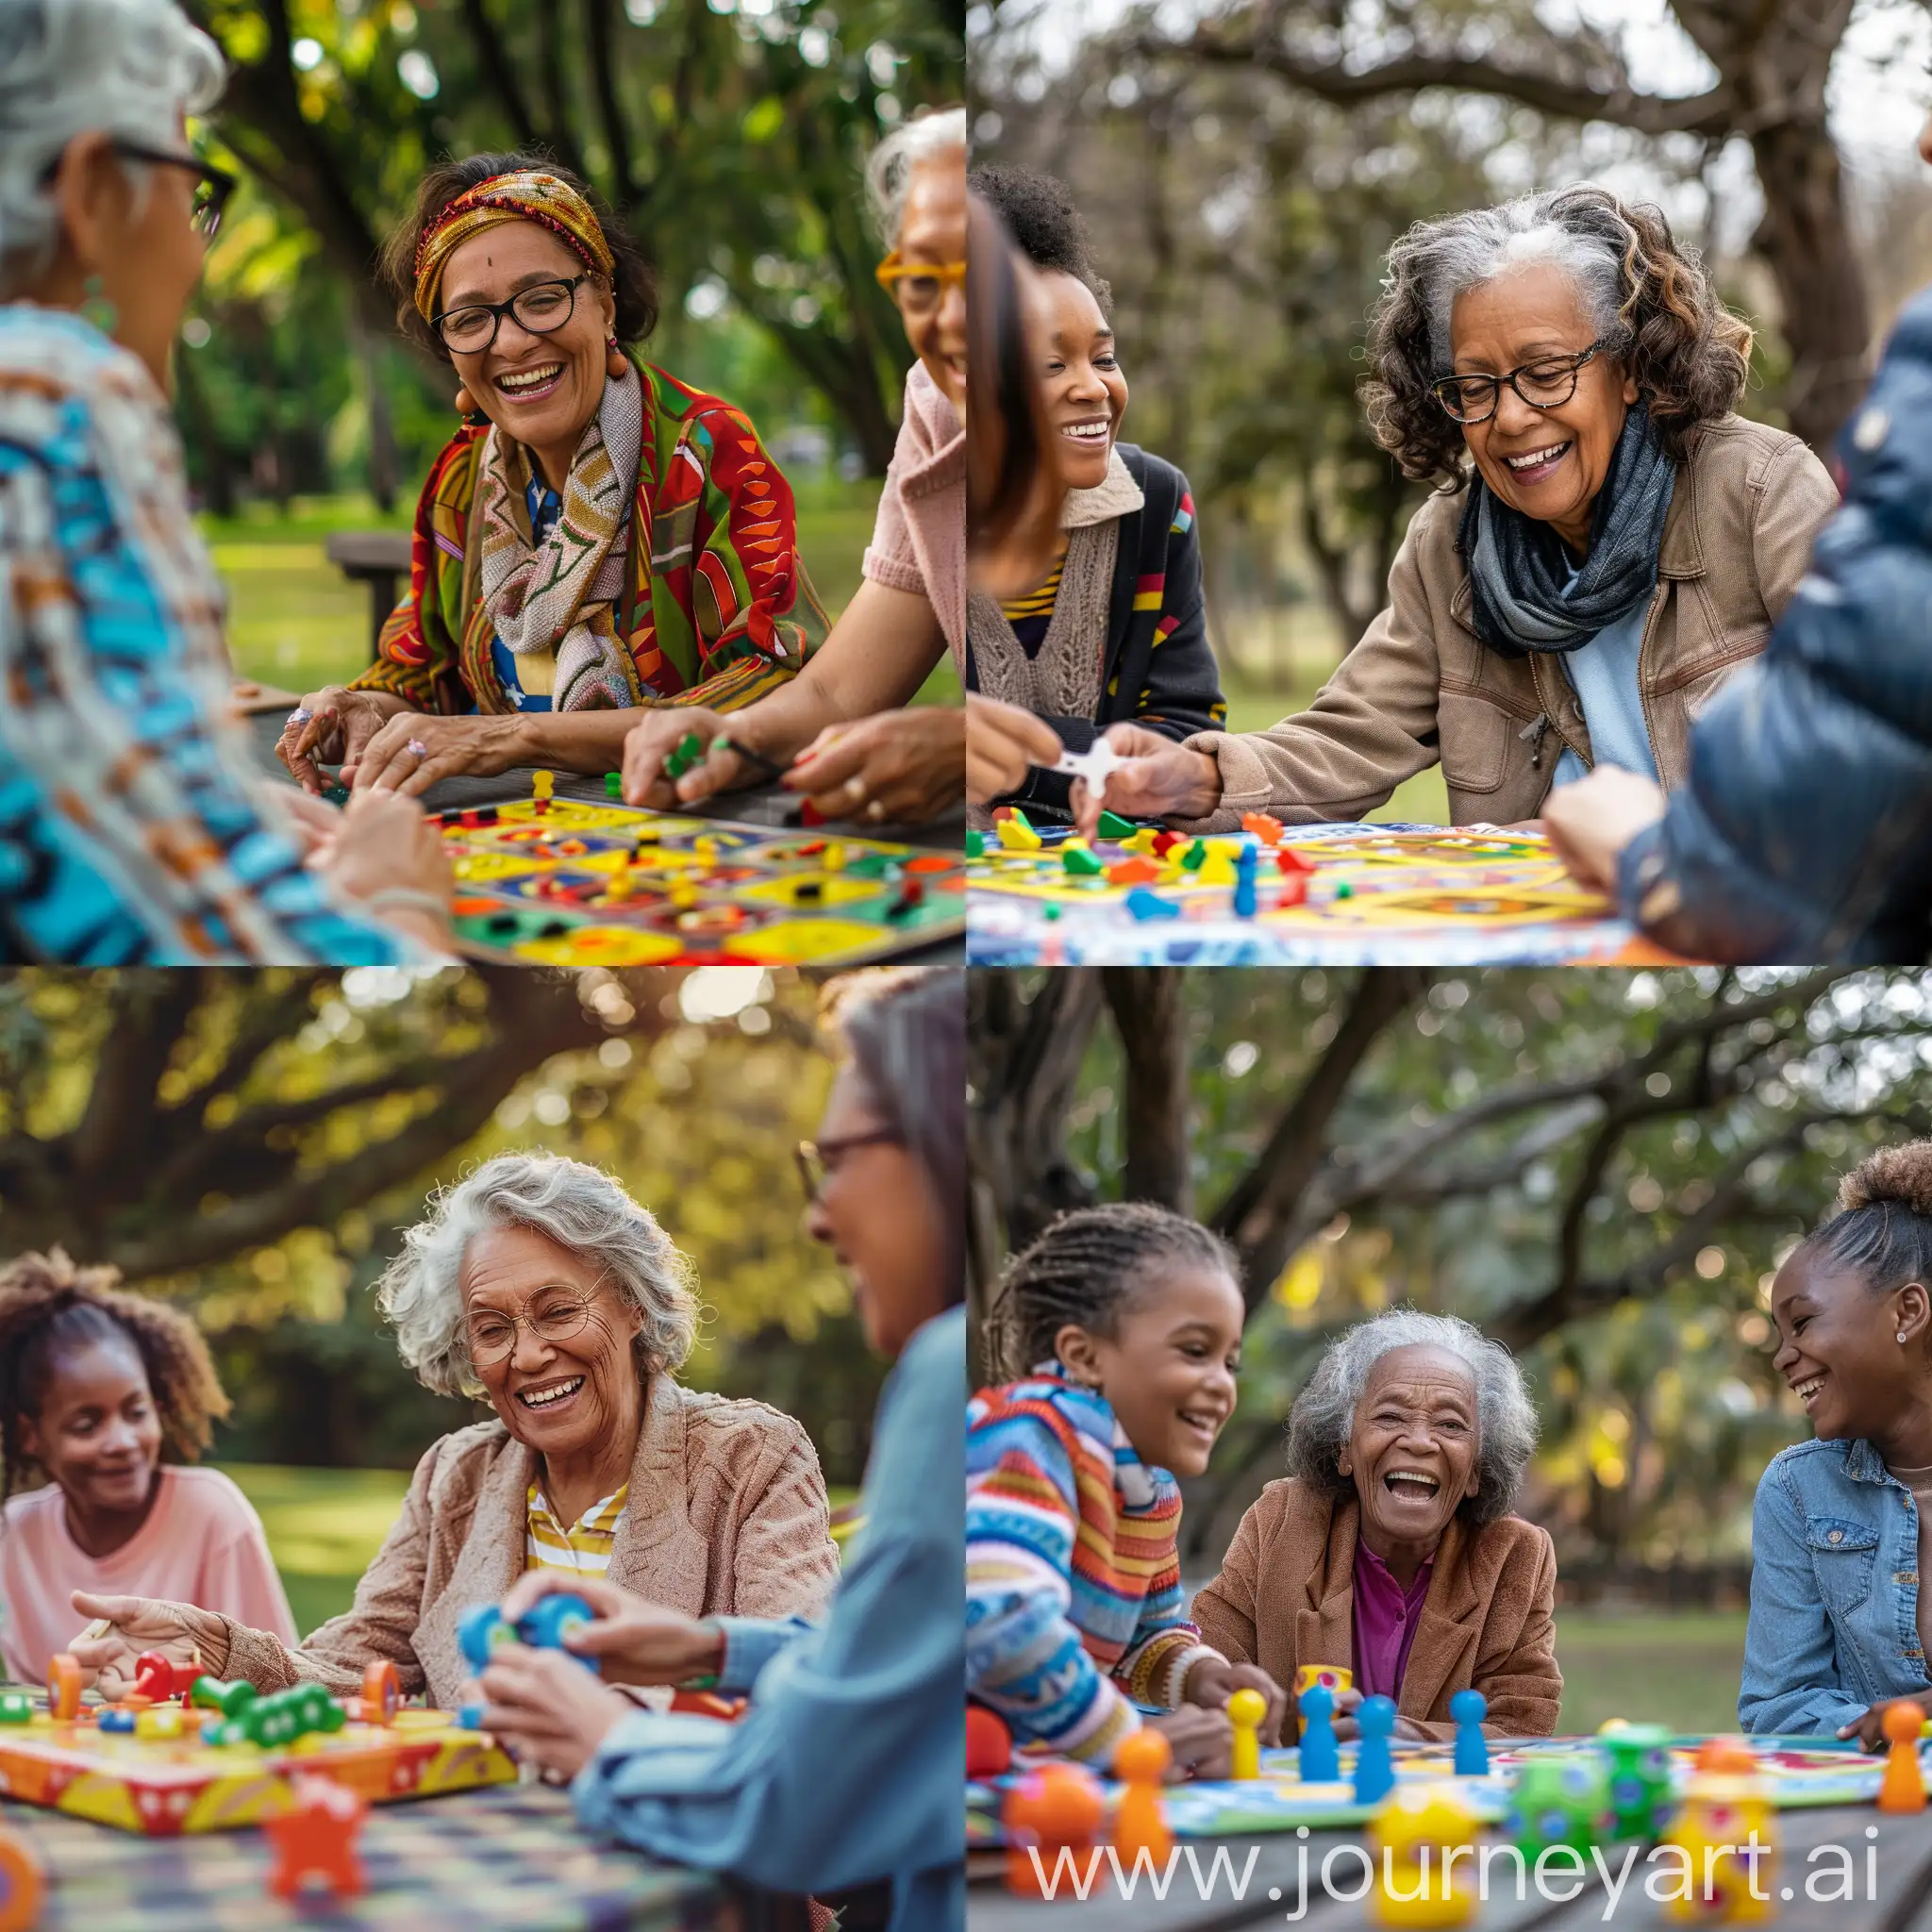 Joyful-Outdoor-Gathering-Friends-Playing-Family-Games